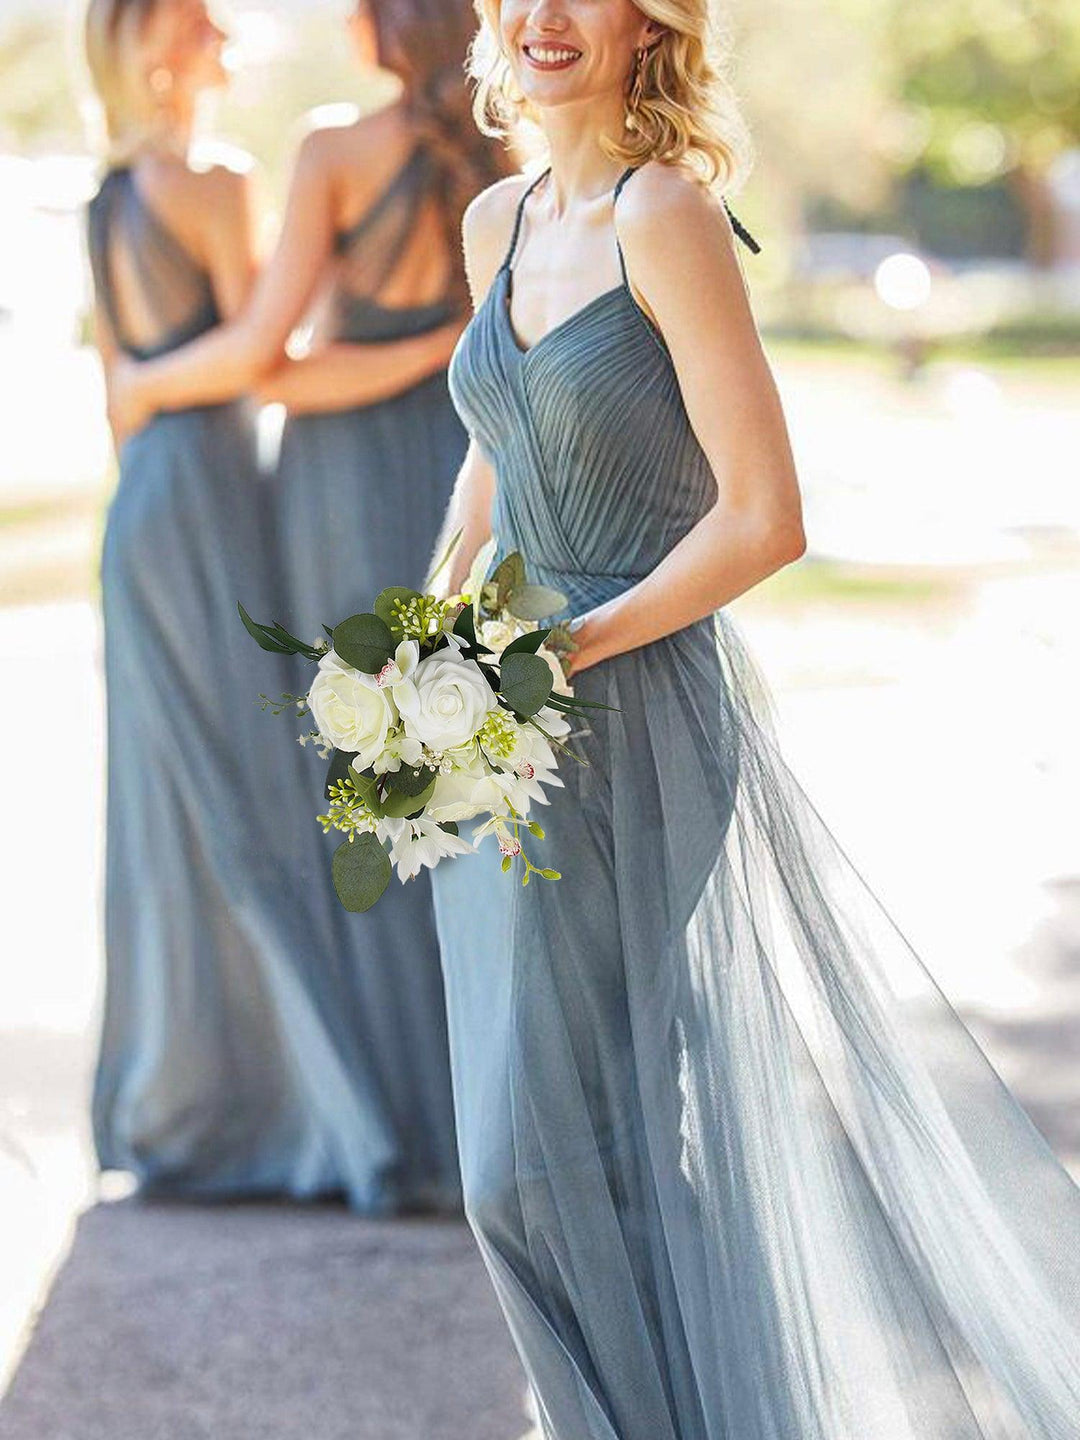 How to Match Bridesmaid Flowers with Your Wedding Theme? - Rinlong Flower